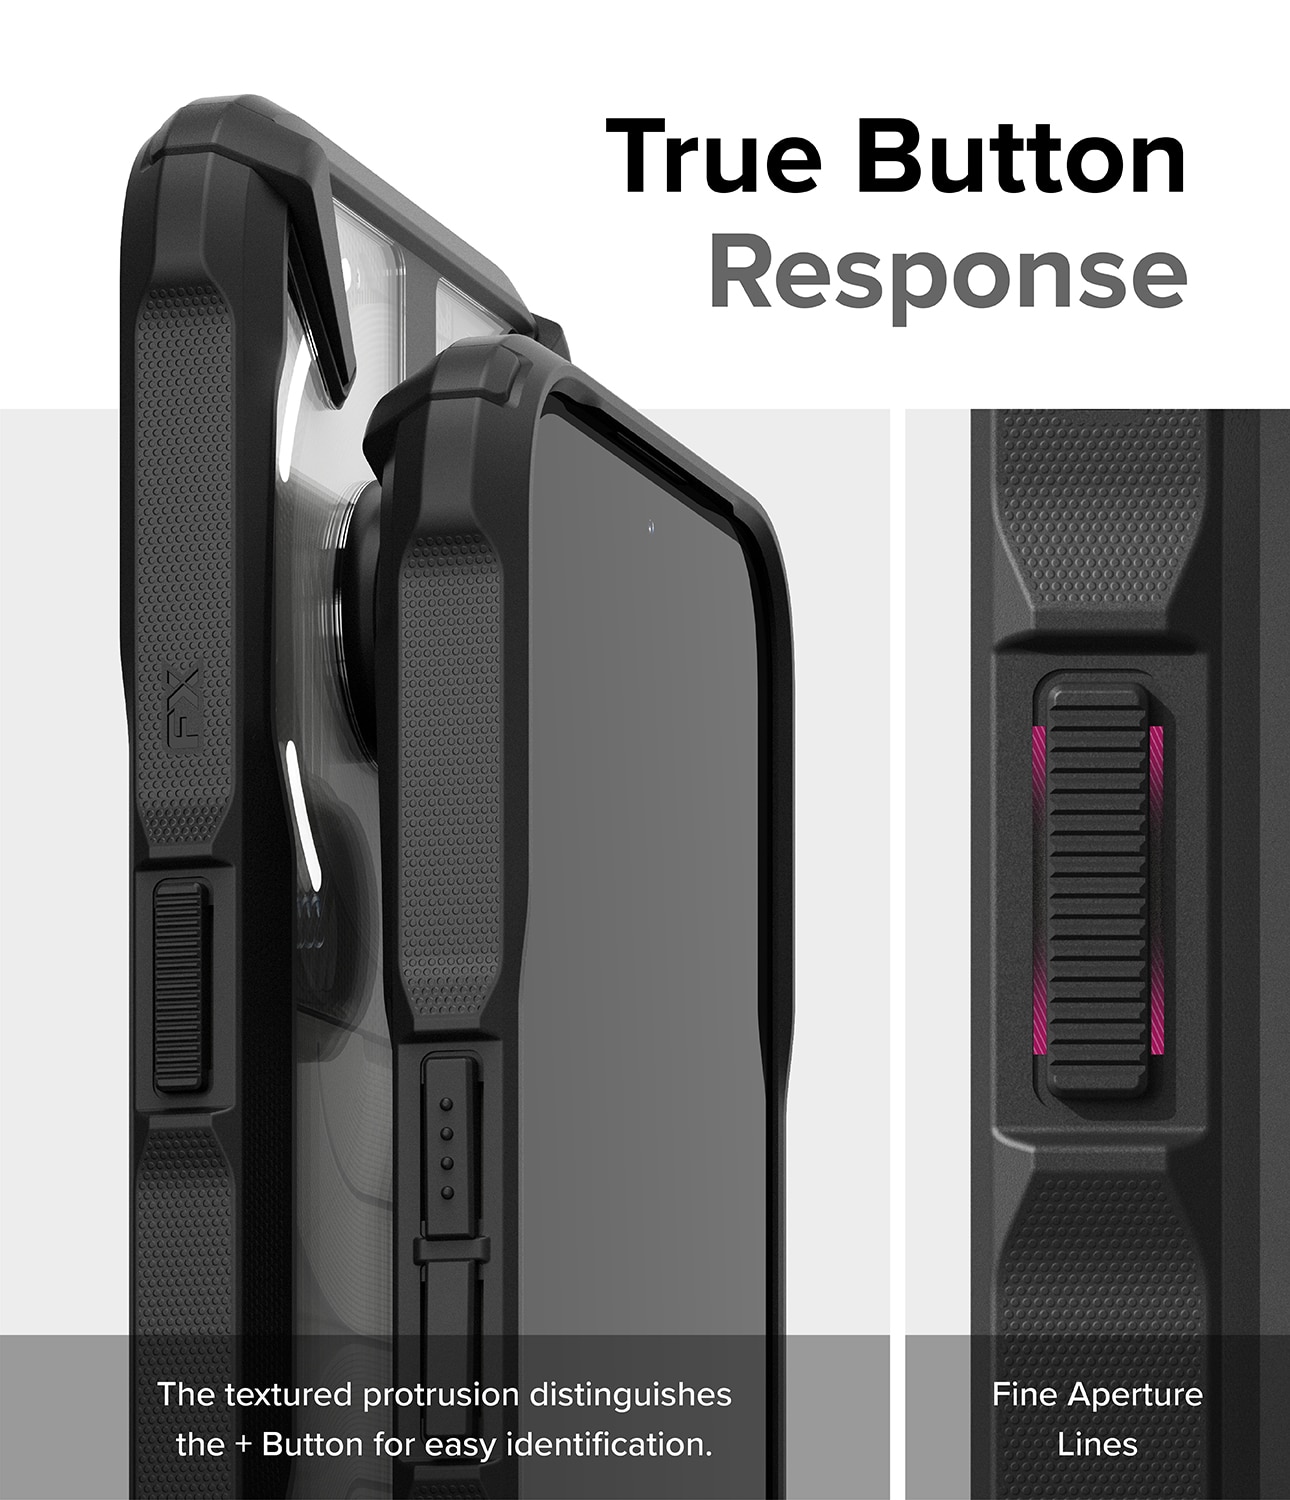 Fusion X Case Nothing Phone 2a musta